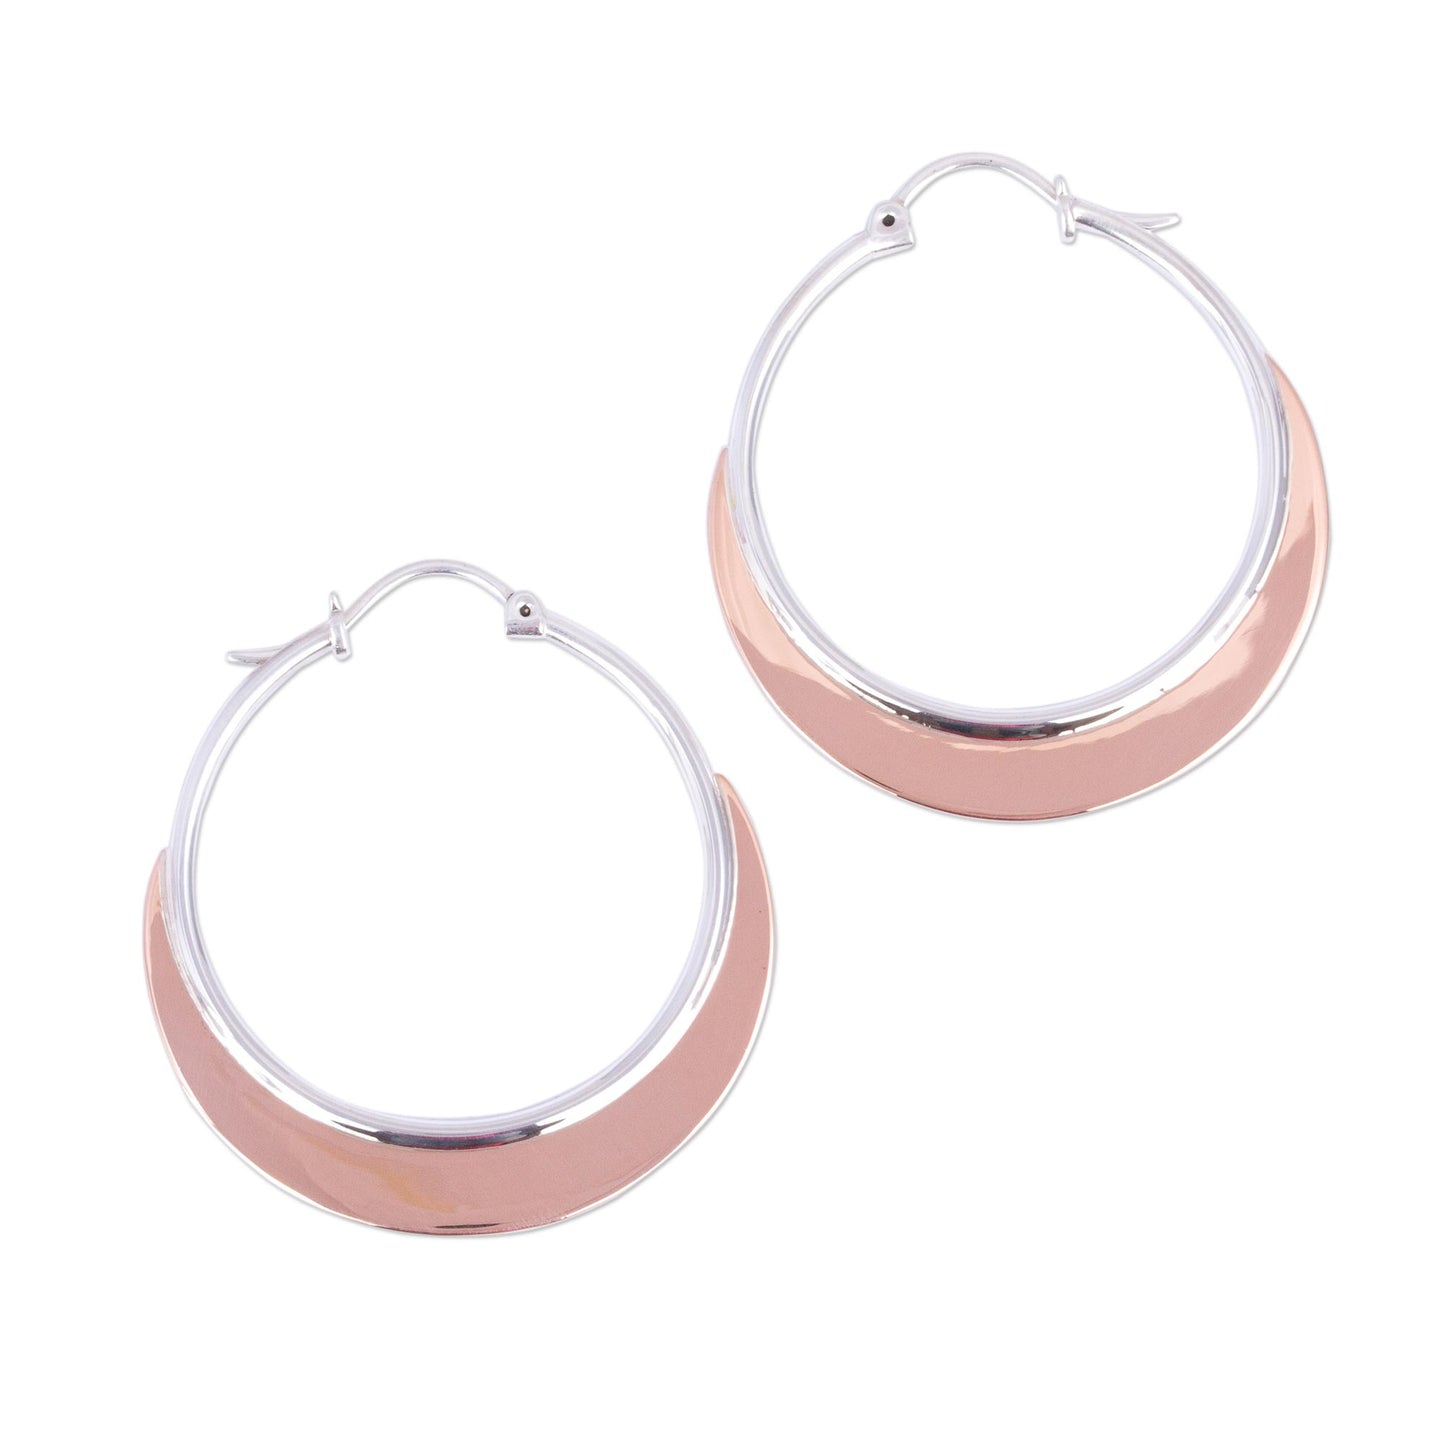 Copper Light Copper Plated Sterling Silver Hoop Earrings from Mexico